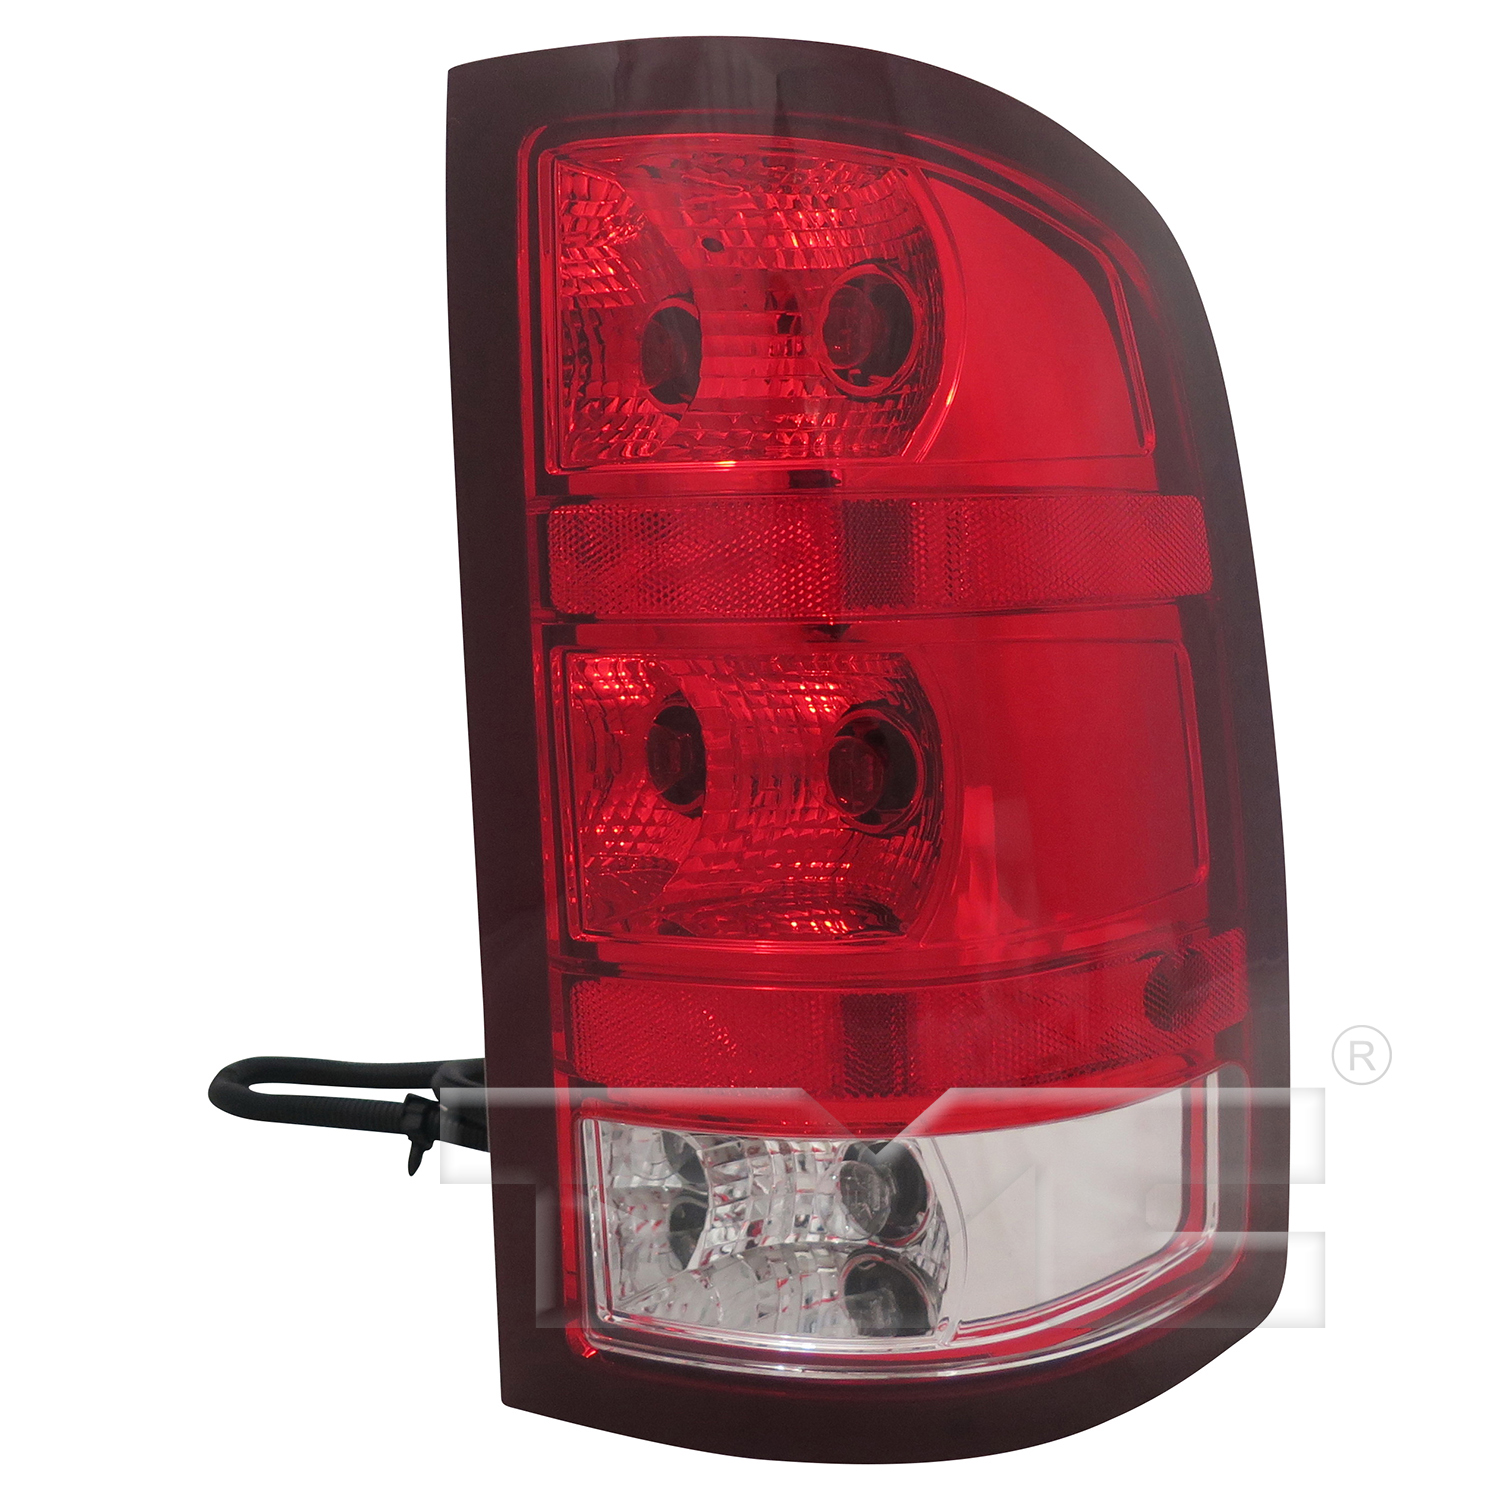 Aftermarket TAILLIGHTS for GMC - SIERRA 1500, SIERRA 1500,07-13,RT Taillamp assy